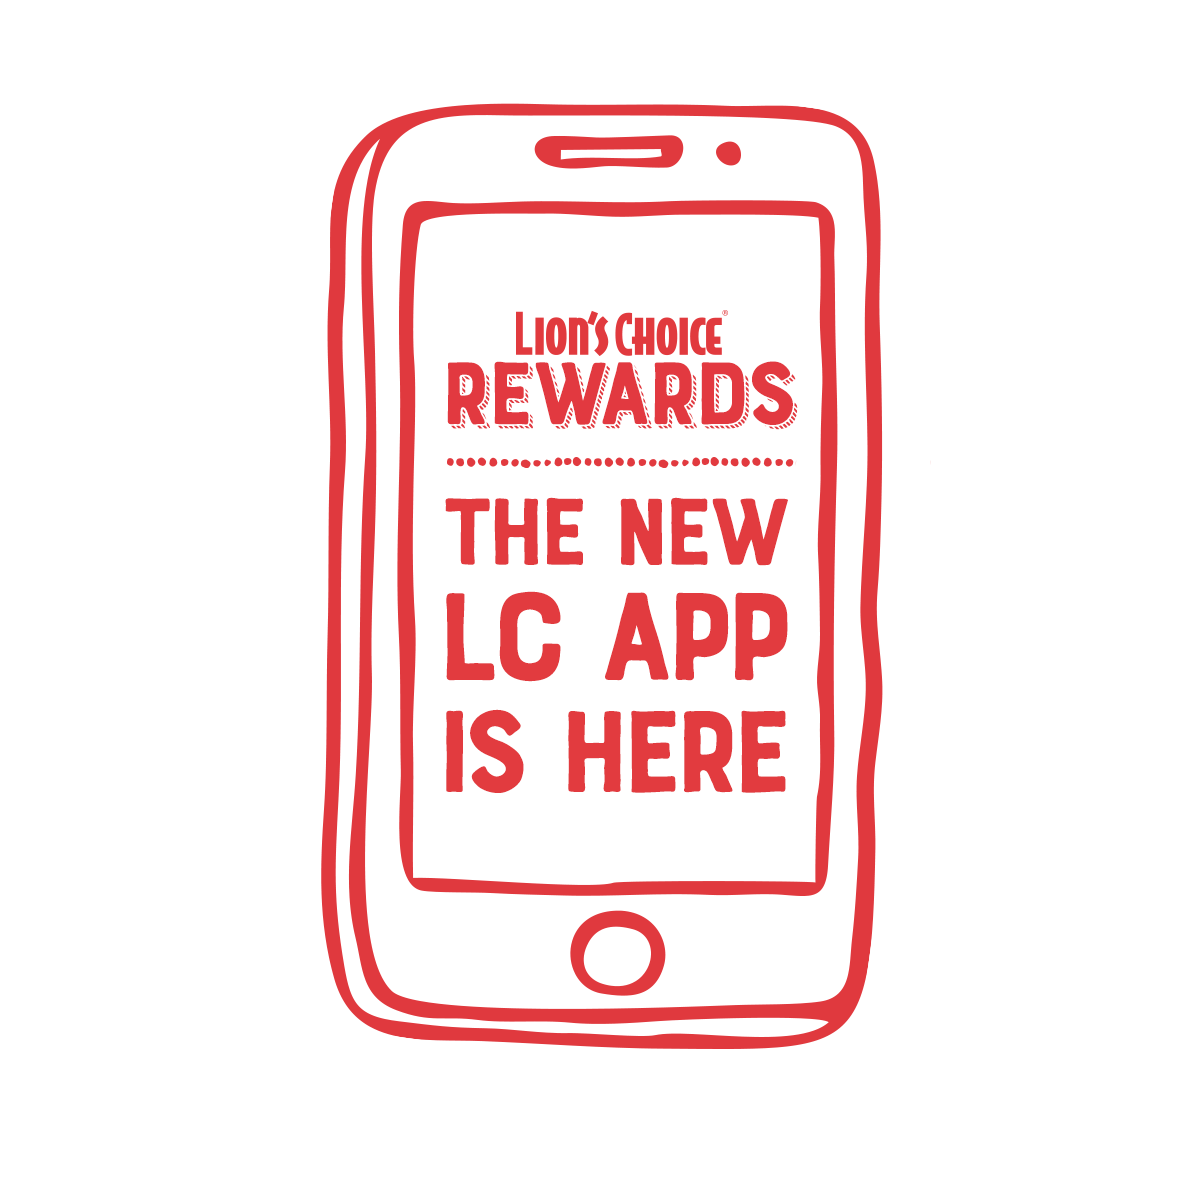 Lion's Choice Rewards. The New LC APP is Here